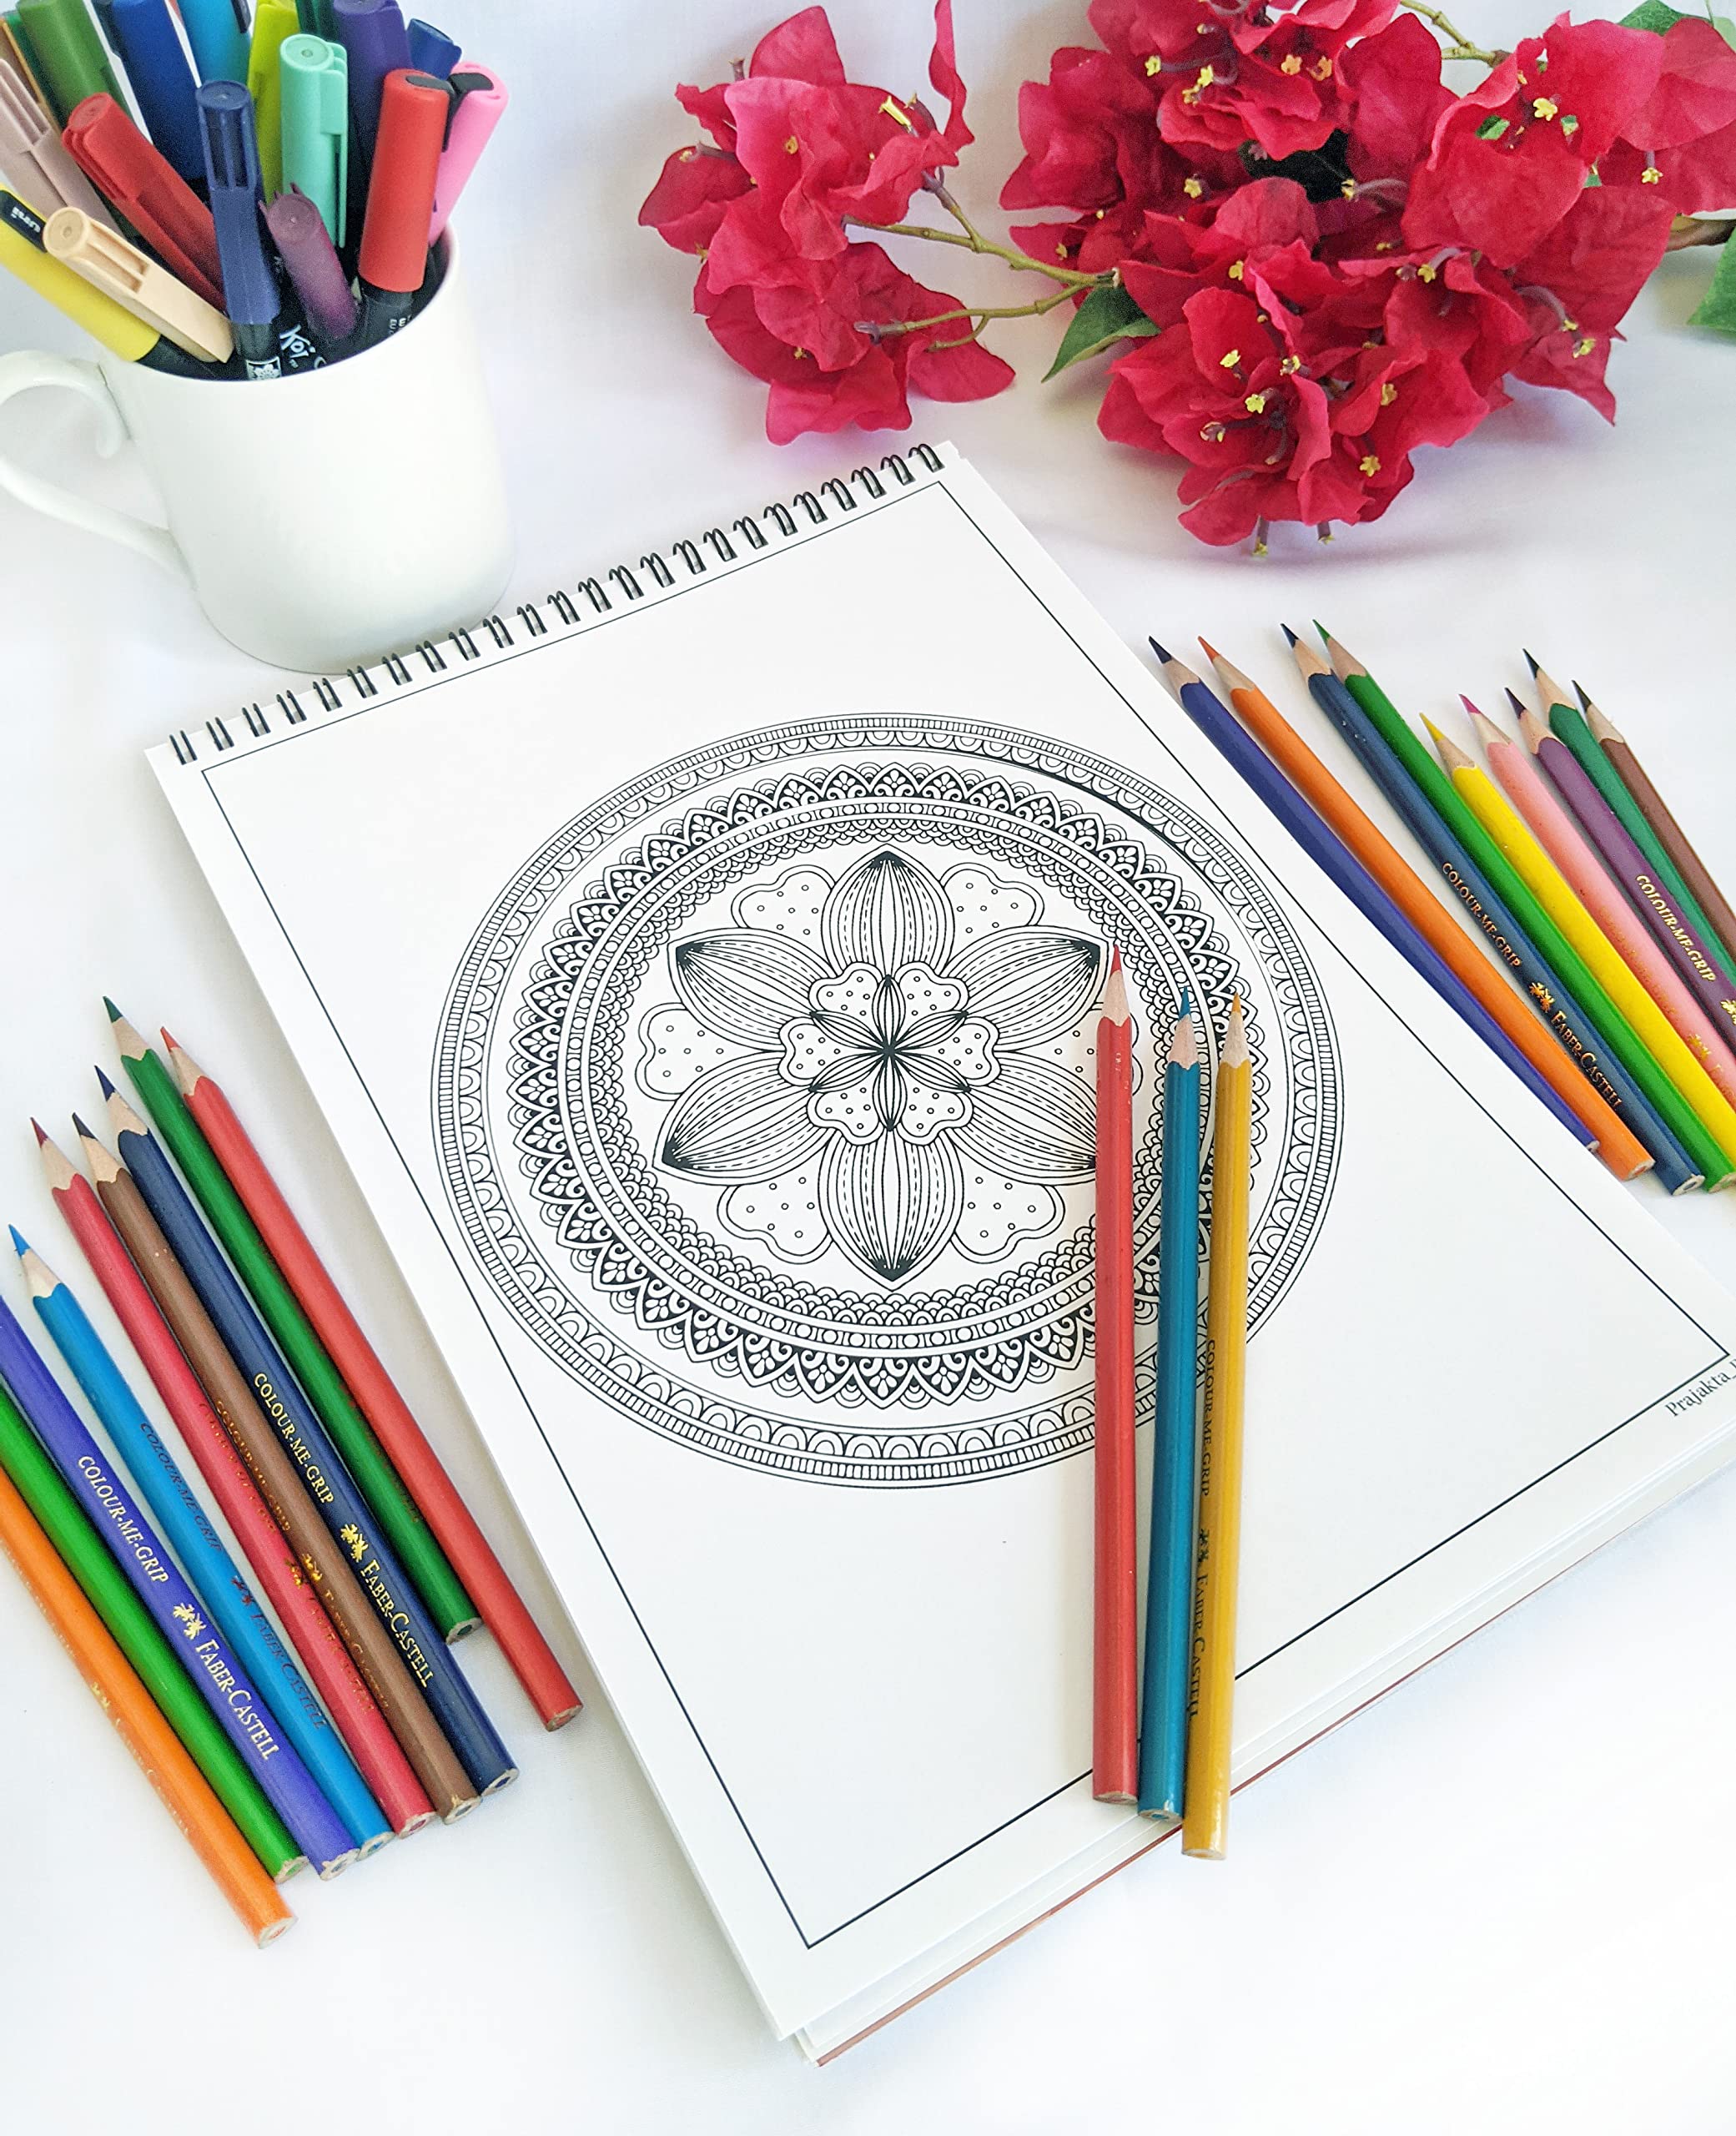 Power Mandalas Coloring book for adults, Spiral bound paperback, stress relieving intricate Offbeat mandalas for grown-ups